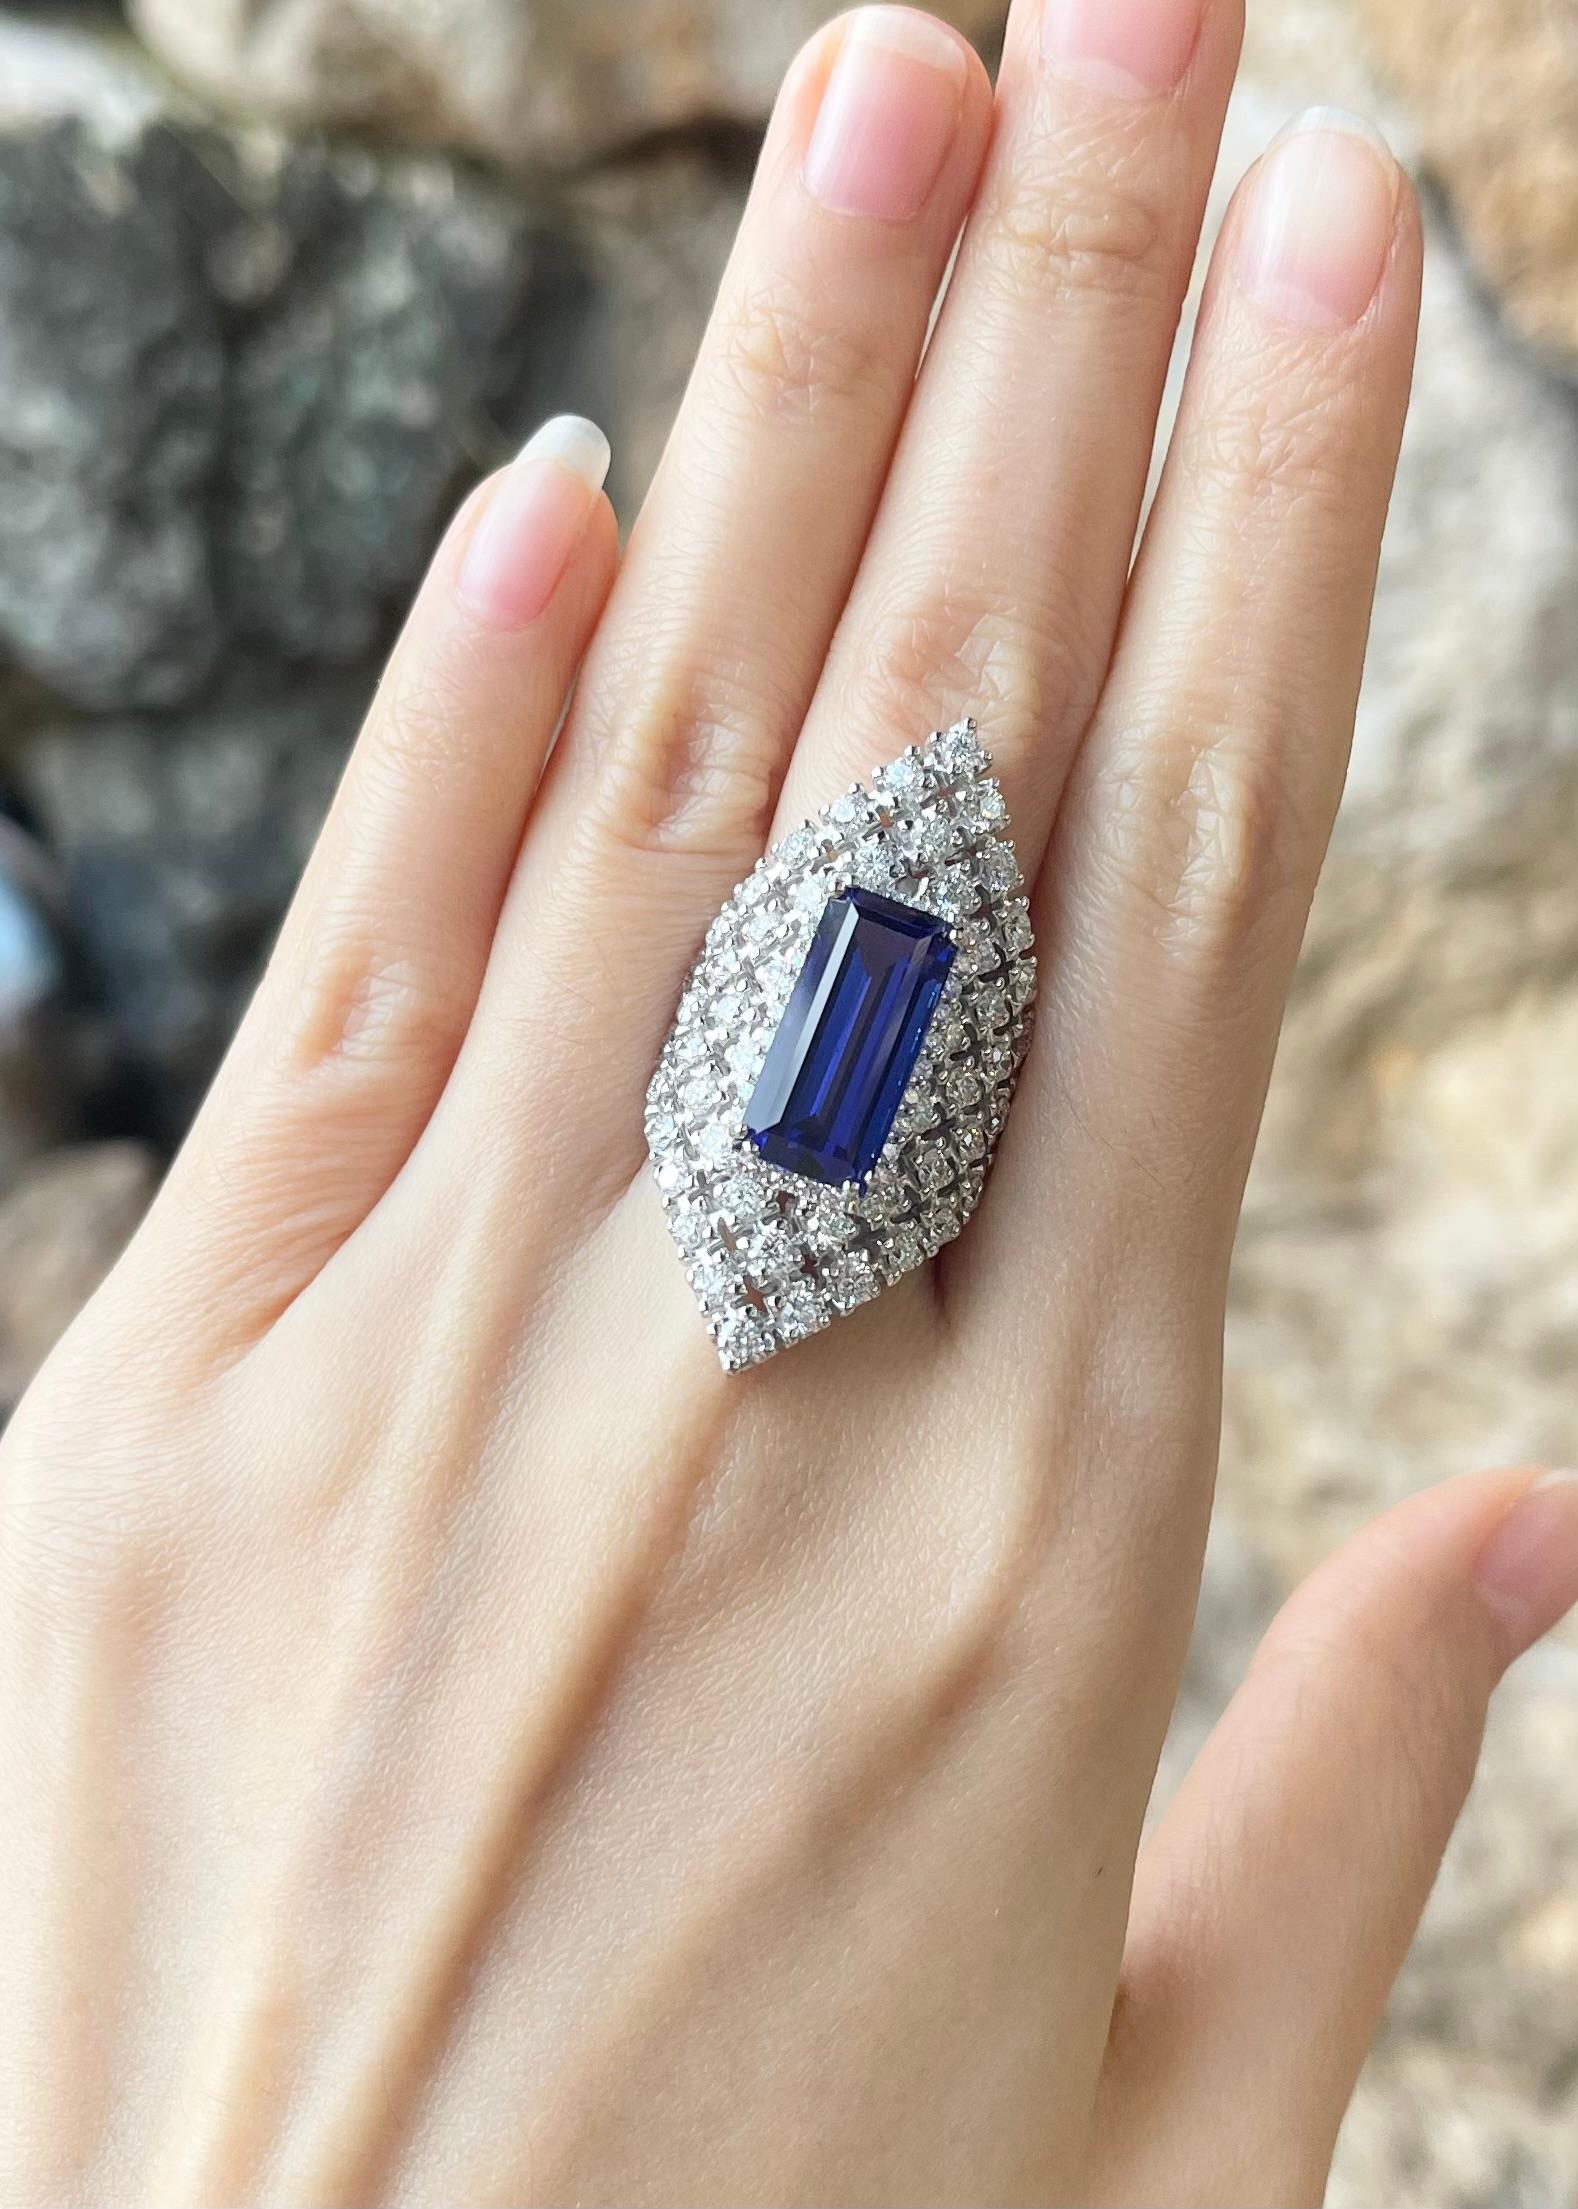 Tanzanite 7.82 carats with Diamond 3.21 carats Ring set in 18K White Gold Settings

Width:  2.1 cm 
Length: 4.0 cm
Ring Size: 53
Total Weight: 17.94 grams

Tanzanite

Width:  0.8 cm 
Length: 1.6 cm

